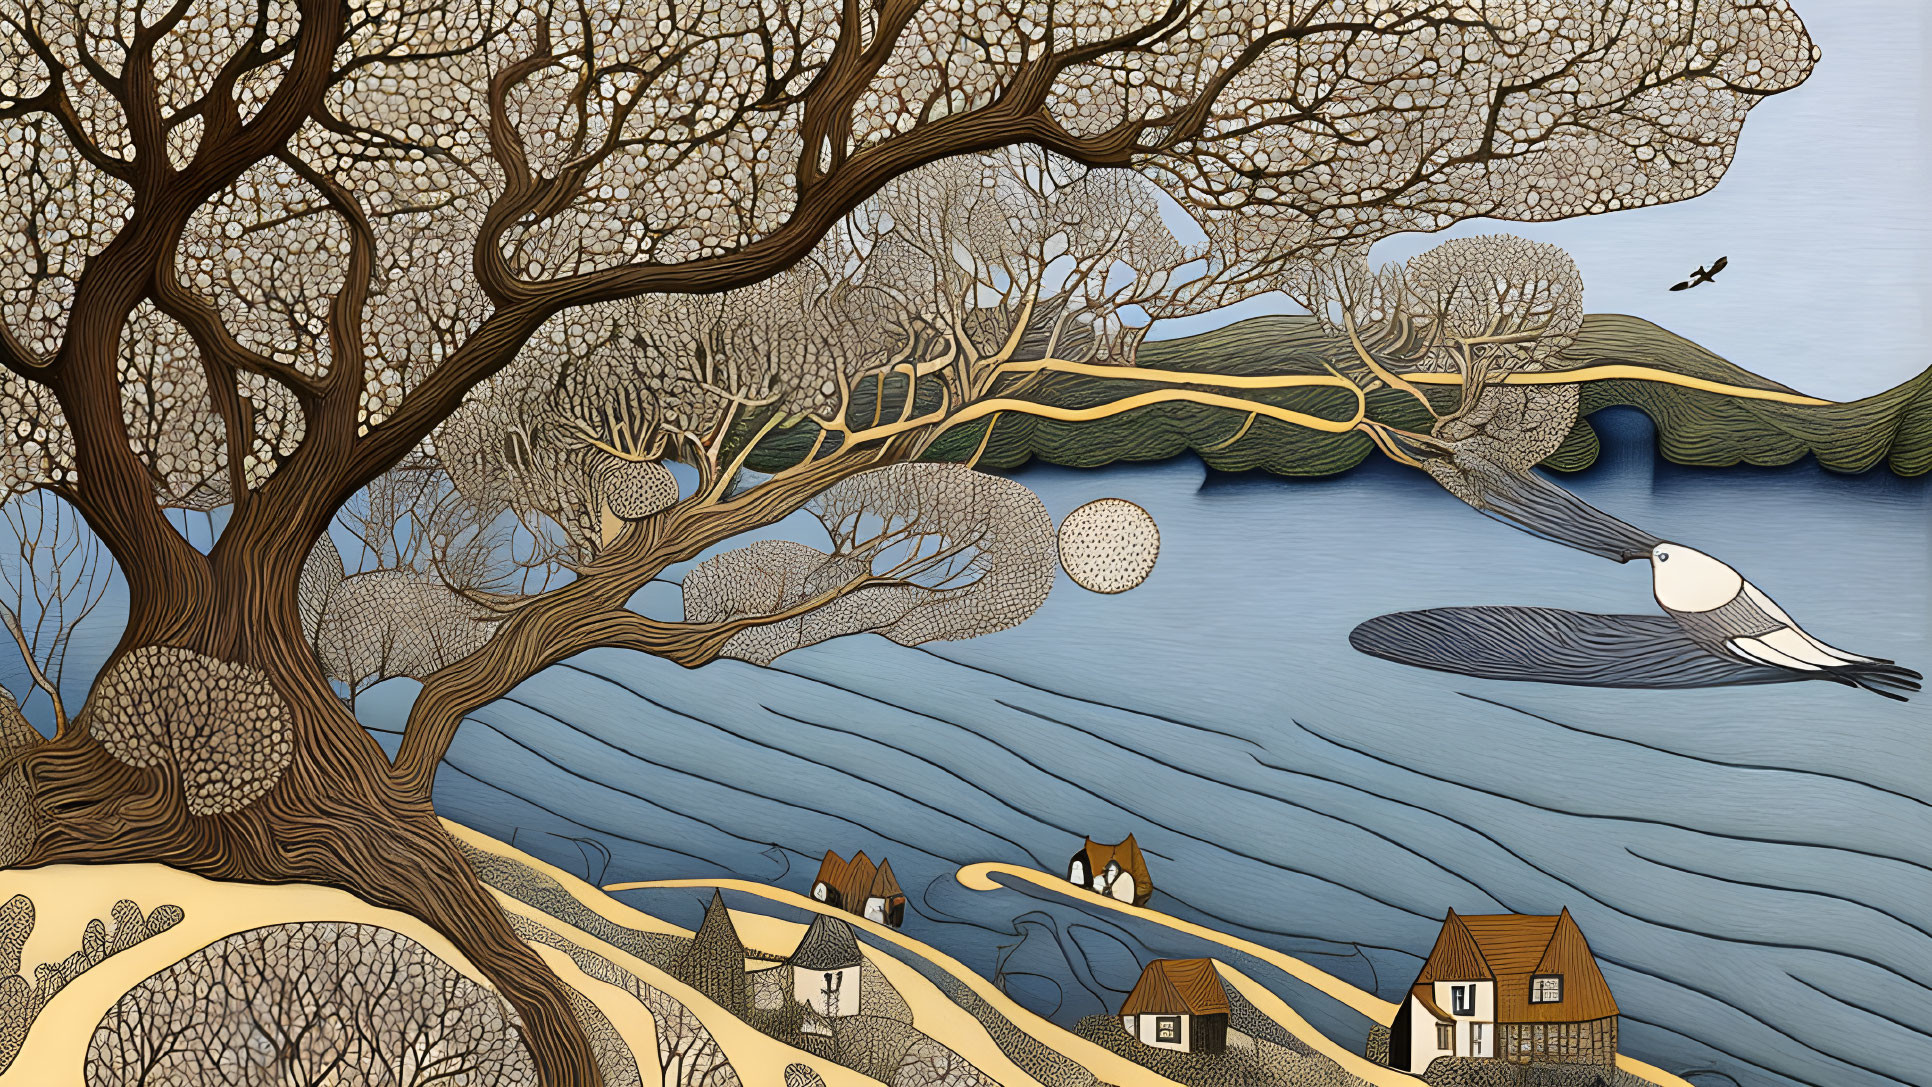 Detailed landscape illustration with trees, houses, hills, river, and bird against patterned sky.